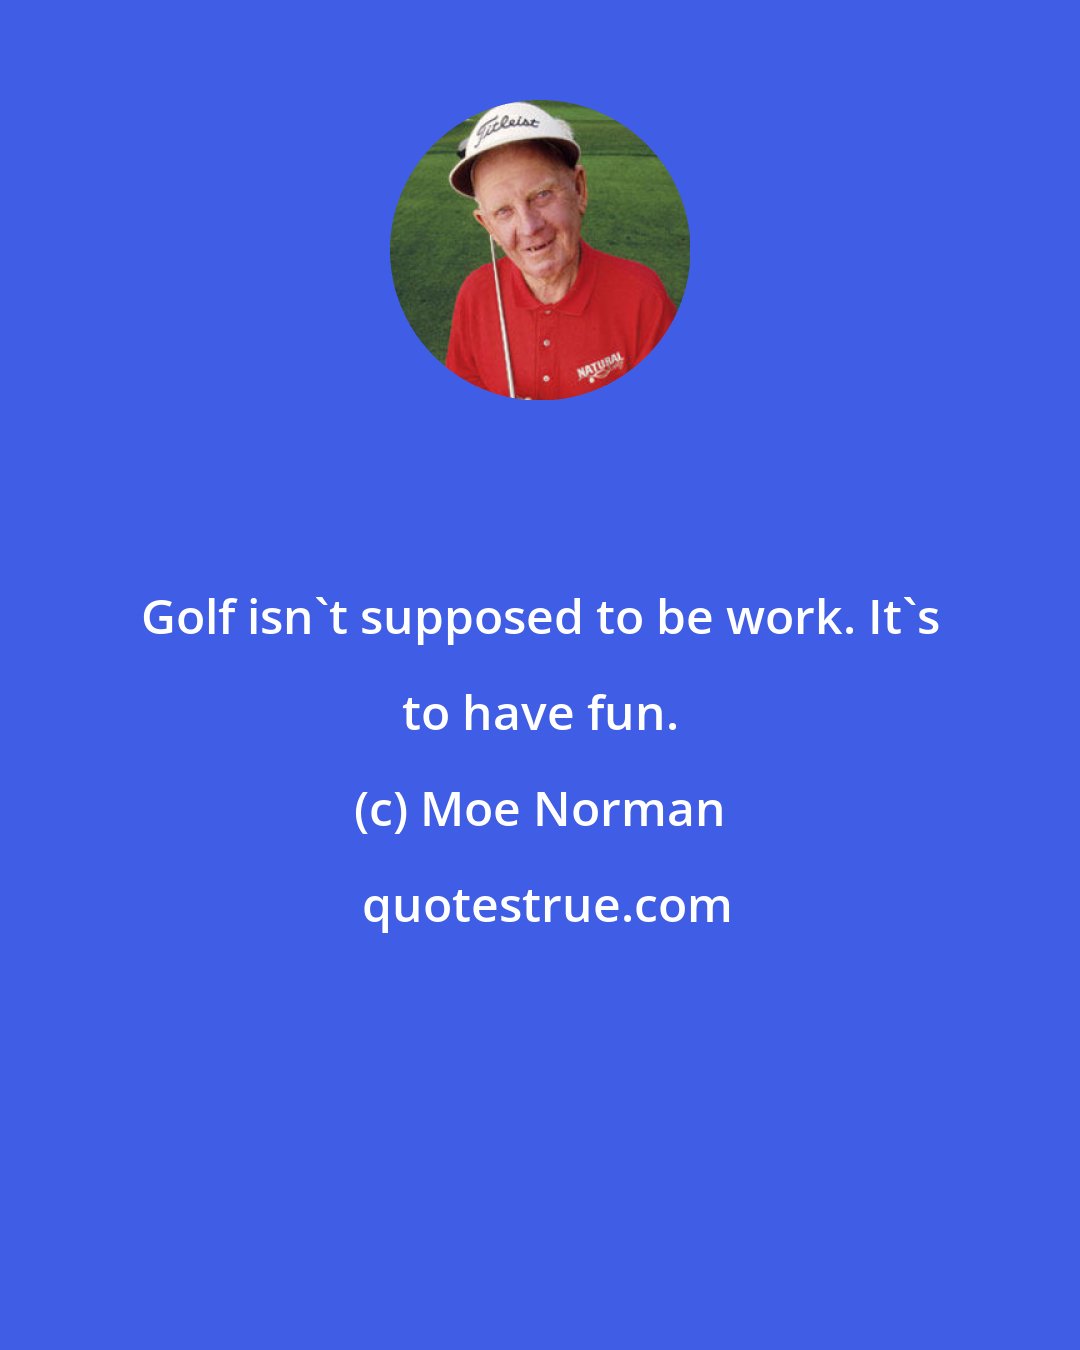 Moe Norman: Golf isn't supposed to be work. It's to have fun.